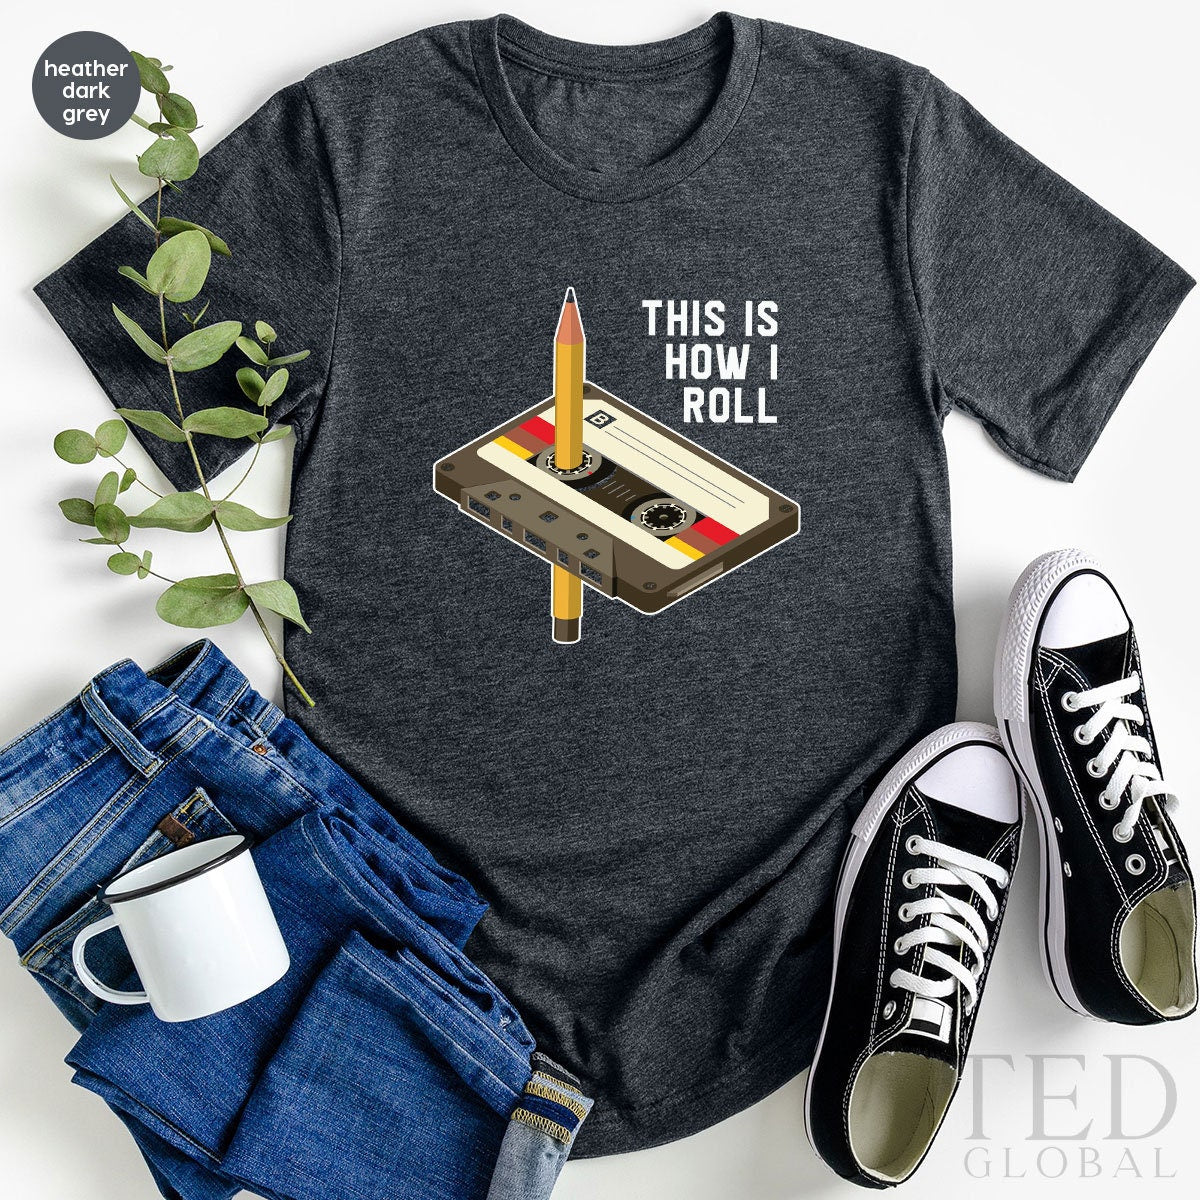 Cute I roll like this T-Shirt, Historical T Shirt, Cute Vintage Tape Shirts, 90s Music Shirt, Music Lover TShirt, Gift For 90's Birthday - Fastdeliverytees.com